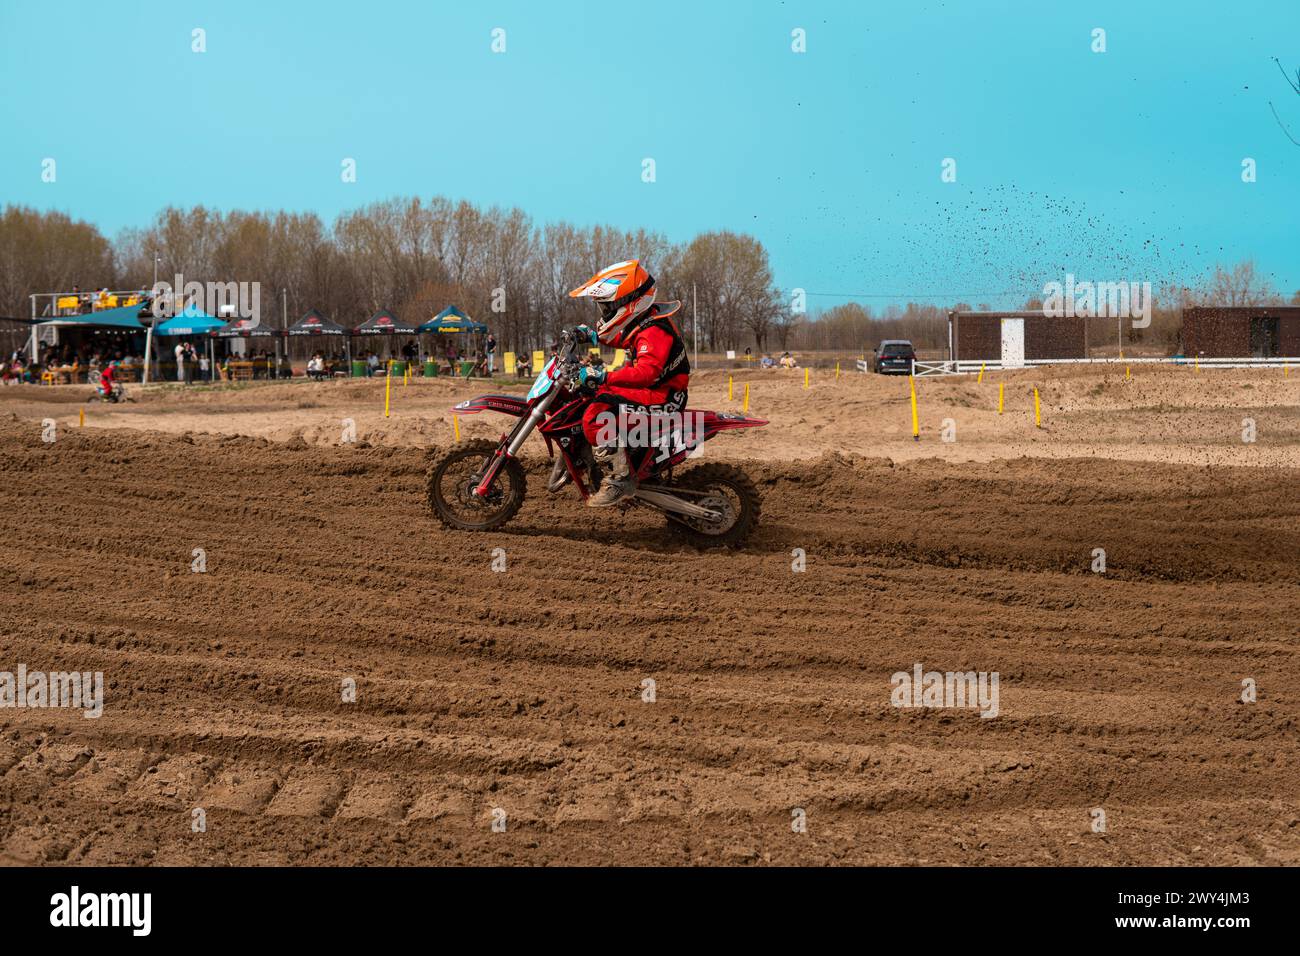 Motocross competition Stock Photo